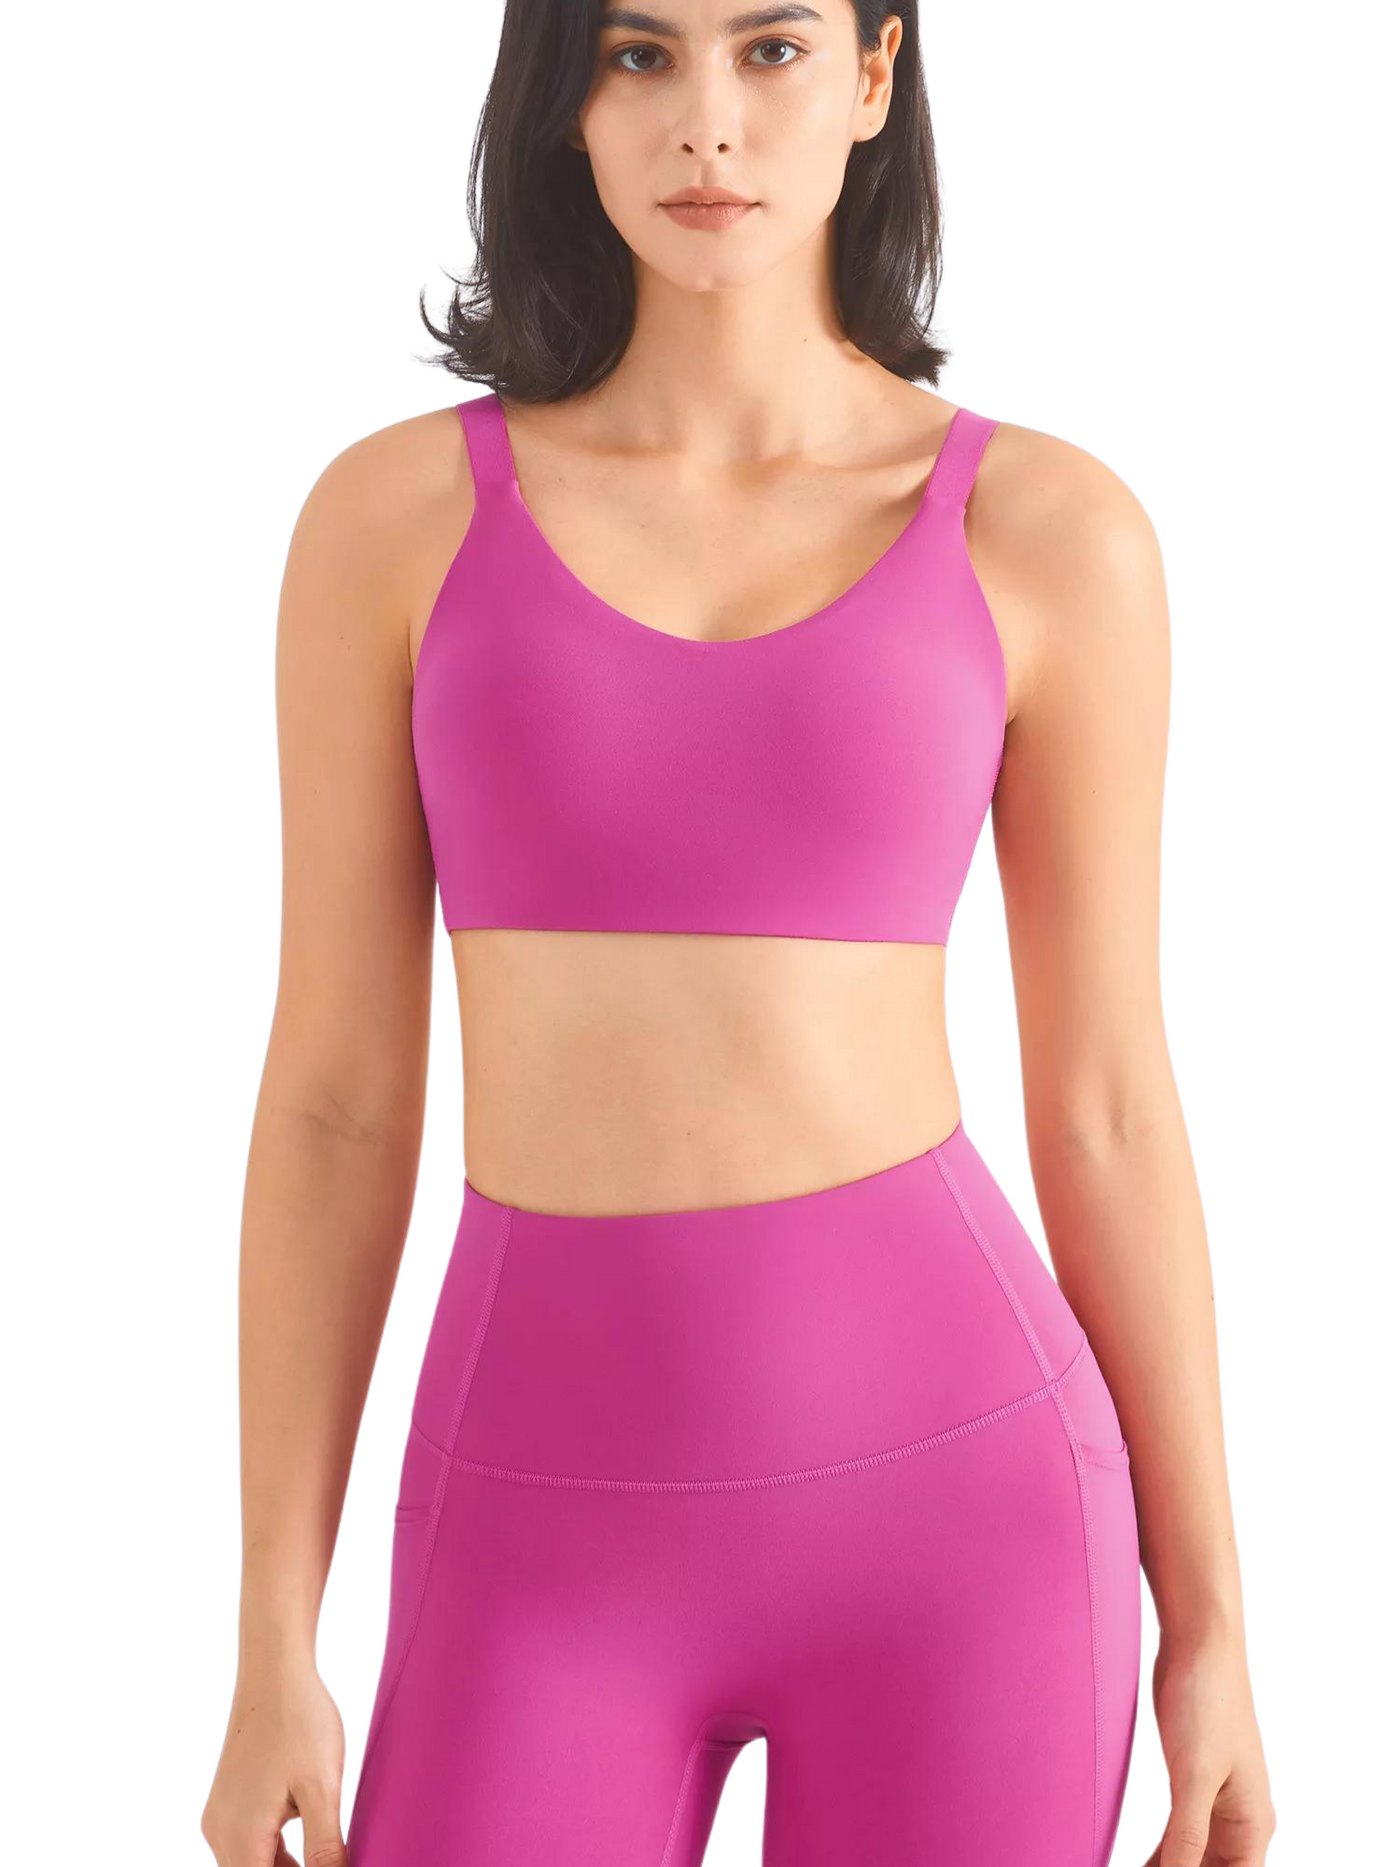 Navalora Fit Everyday Comfortable and Supportive Sports Bra with Adjustable Straps in Lychee Pink Front View